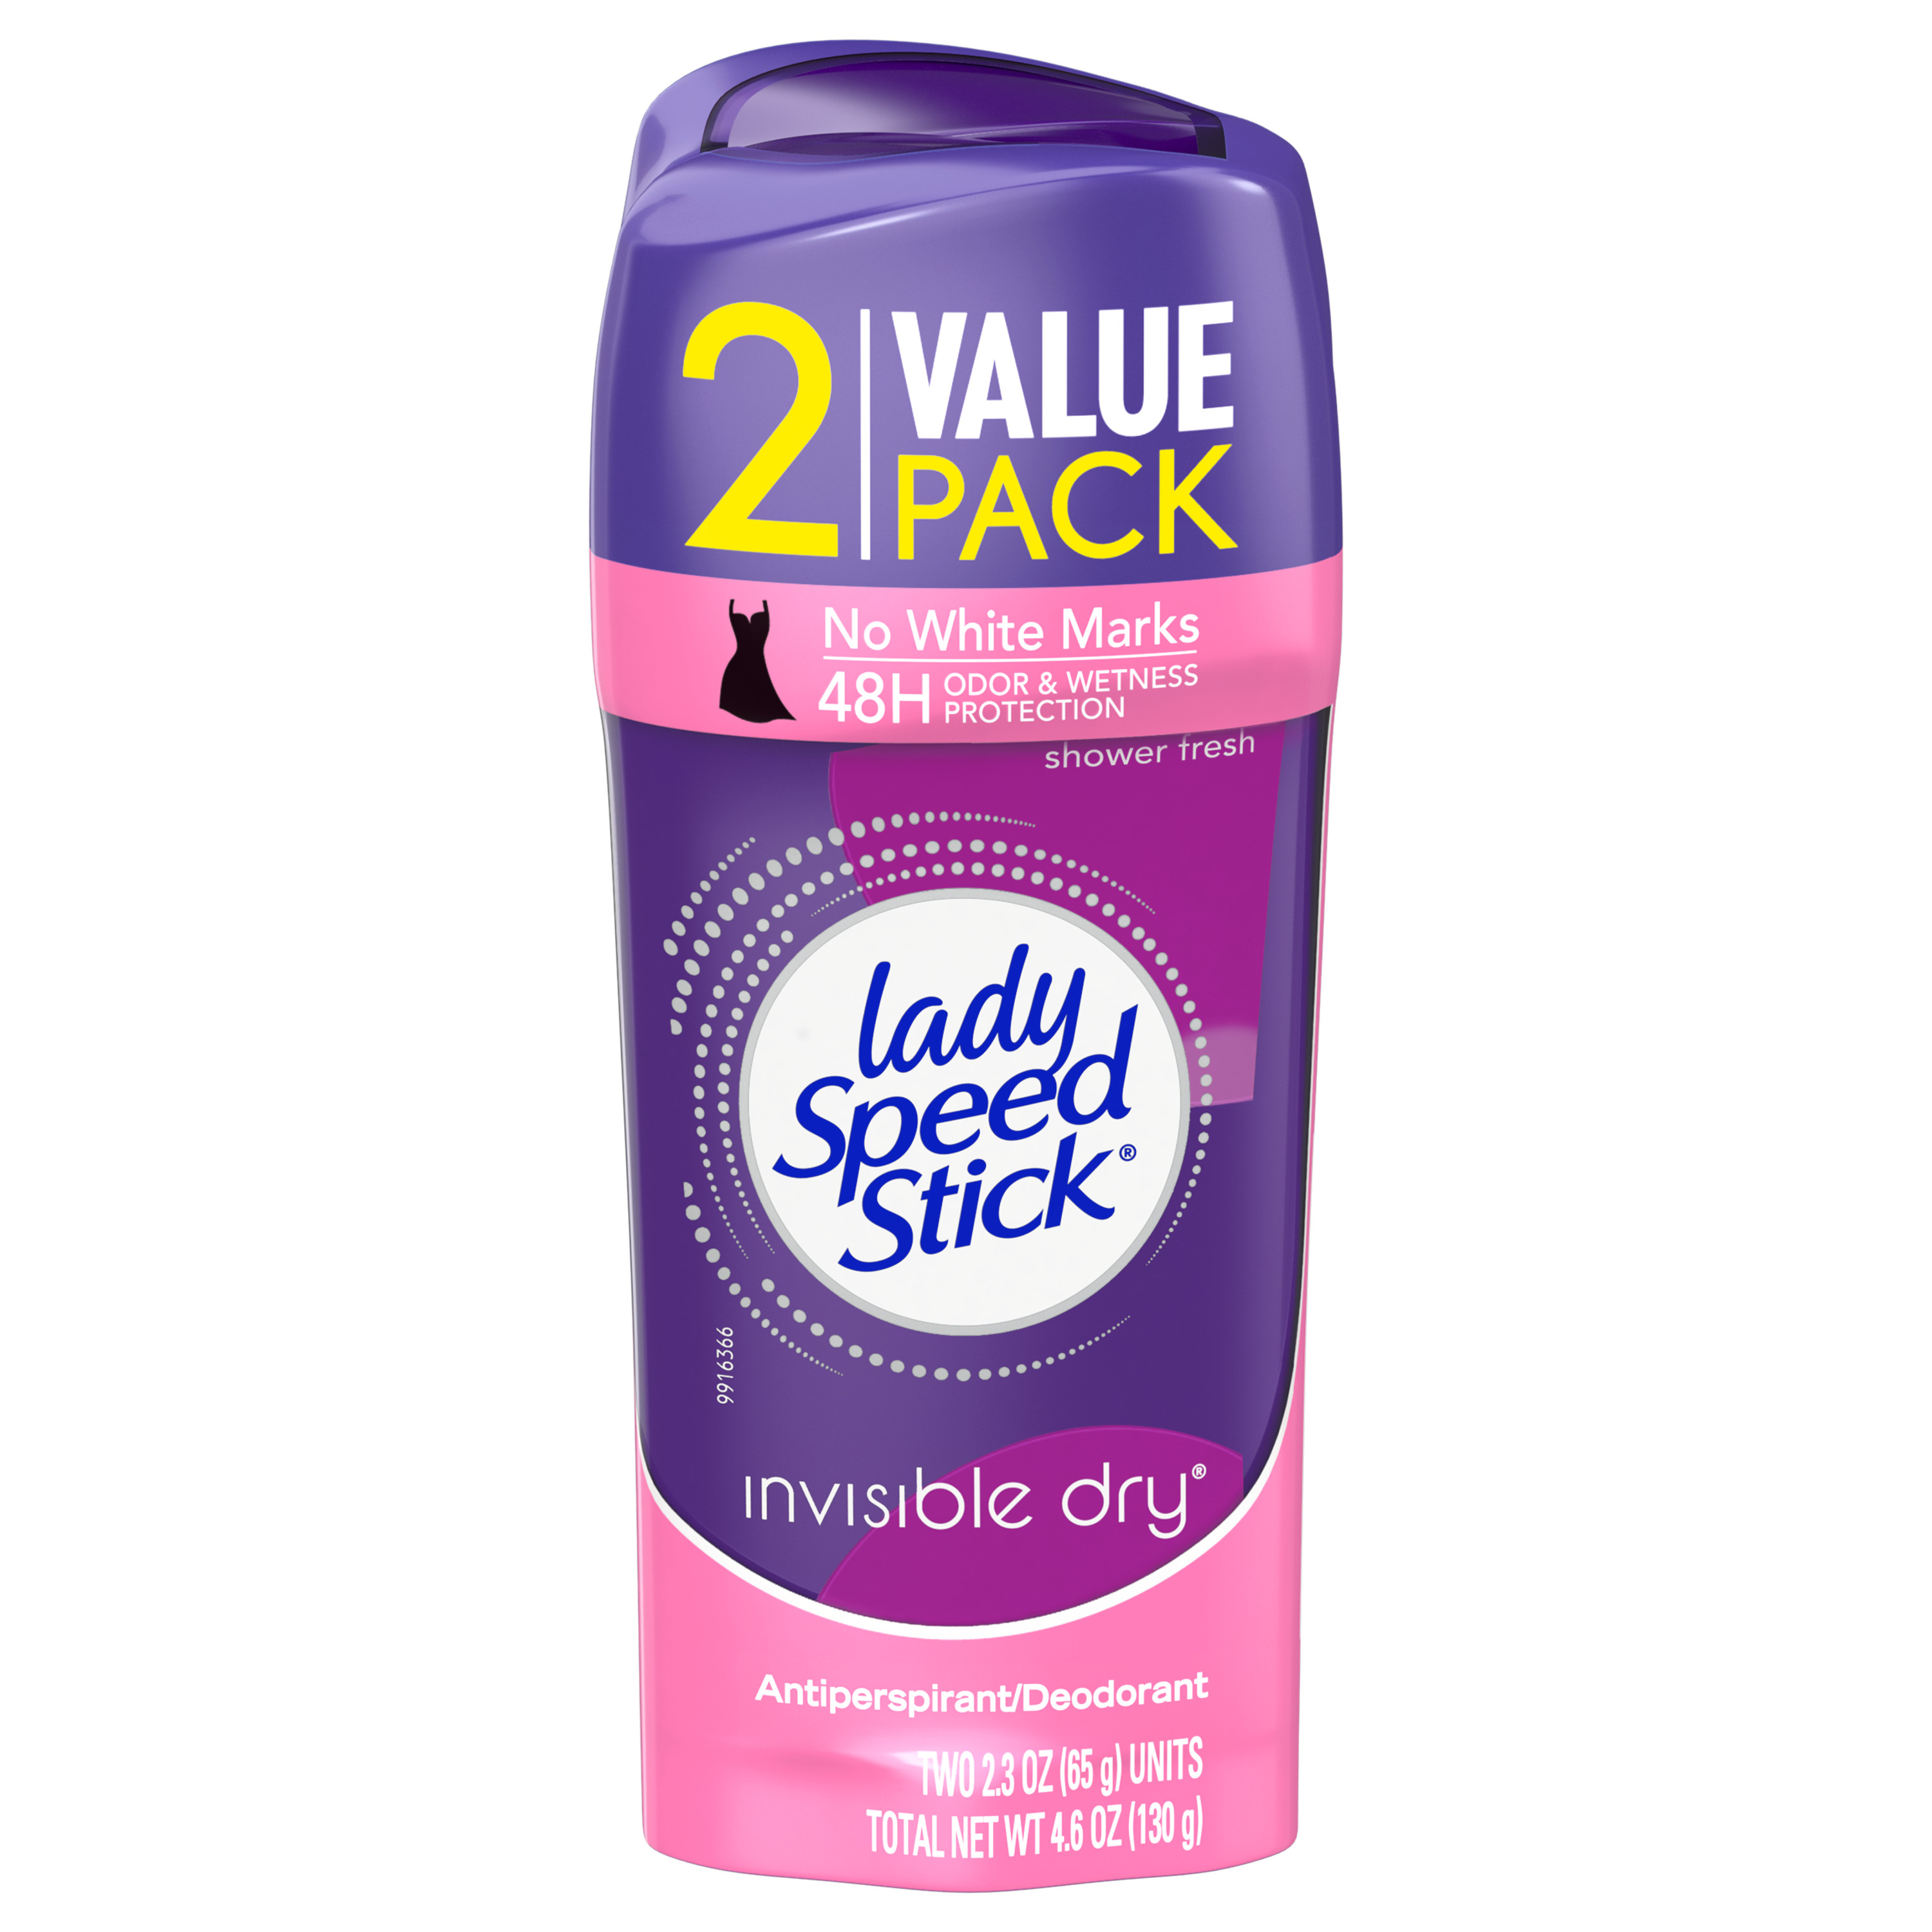 Lady Speed Stick Invisible Dry Antiperspirant Female Deodorant, Shower Fresh, 2 Pack, 2.3 oz - image 1 of 15